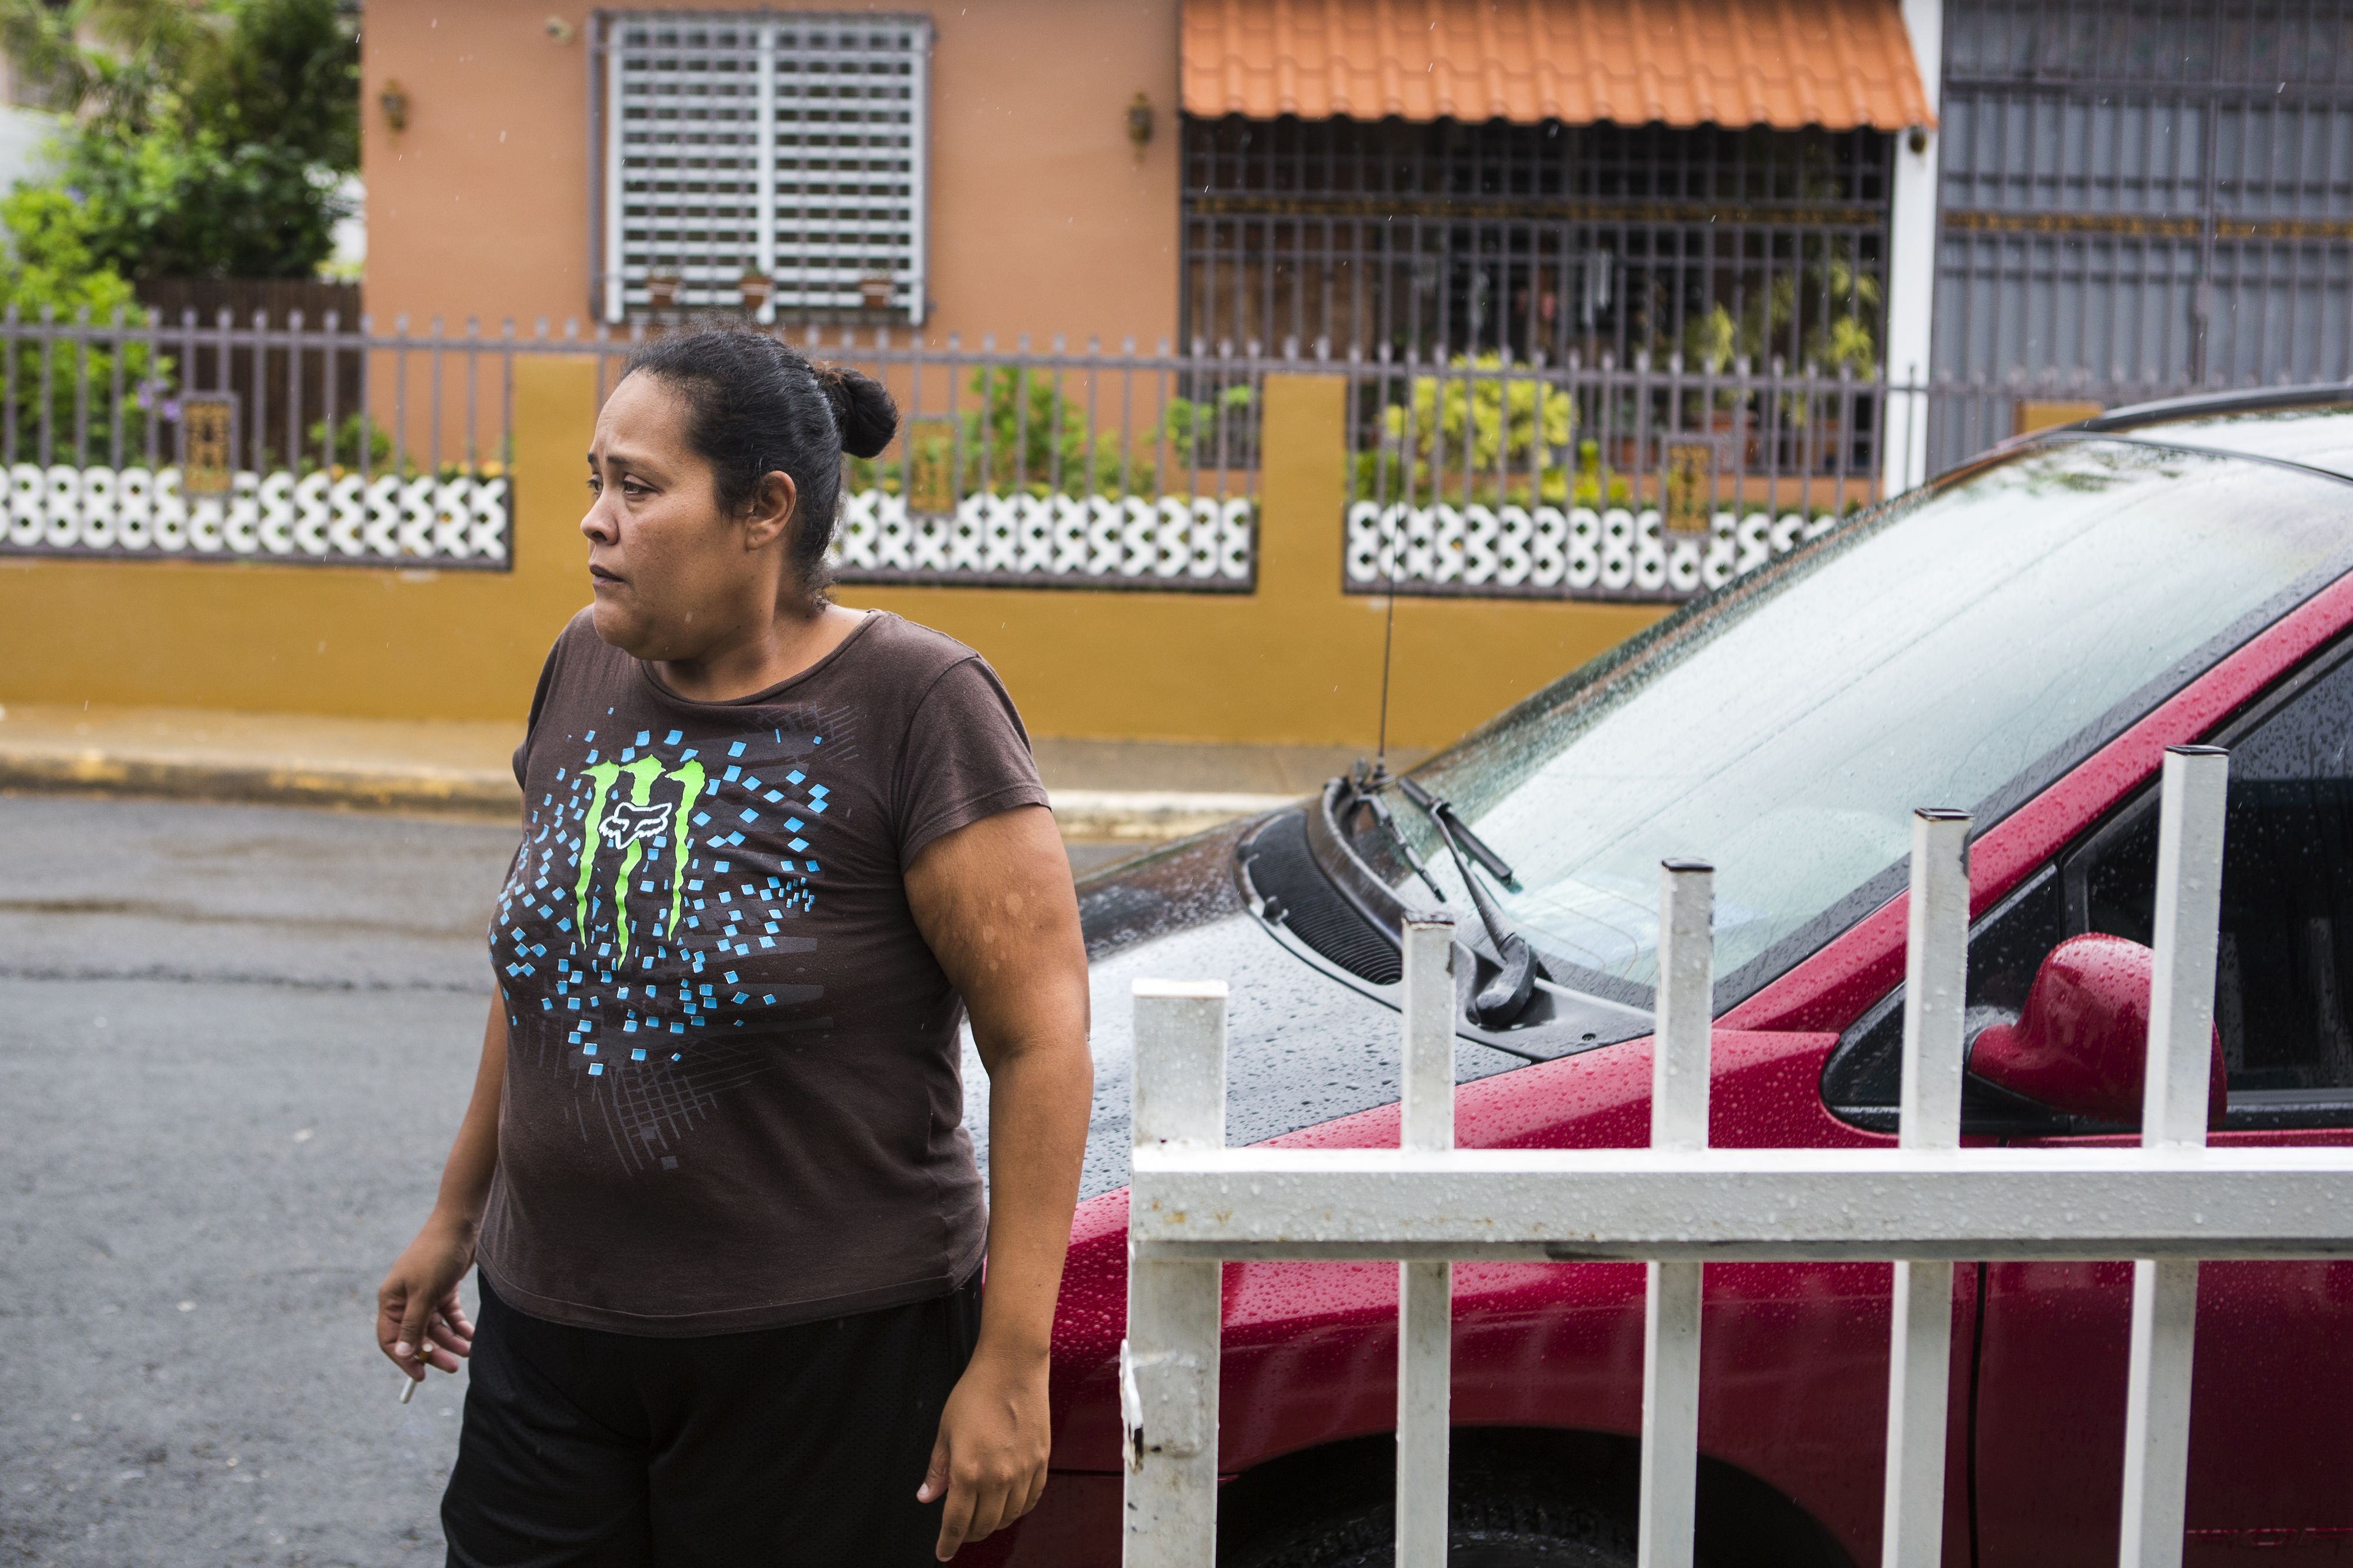 Karen Feliciano smokes a cigarette outside her home in Aibonito. Nearly 60 days after Hurricane Maria passed, the family is still without power—a necessity for her disabled son Kenny's health. Image by Ryan Michalesko. Puerto Rico, 2017.